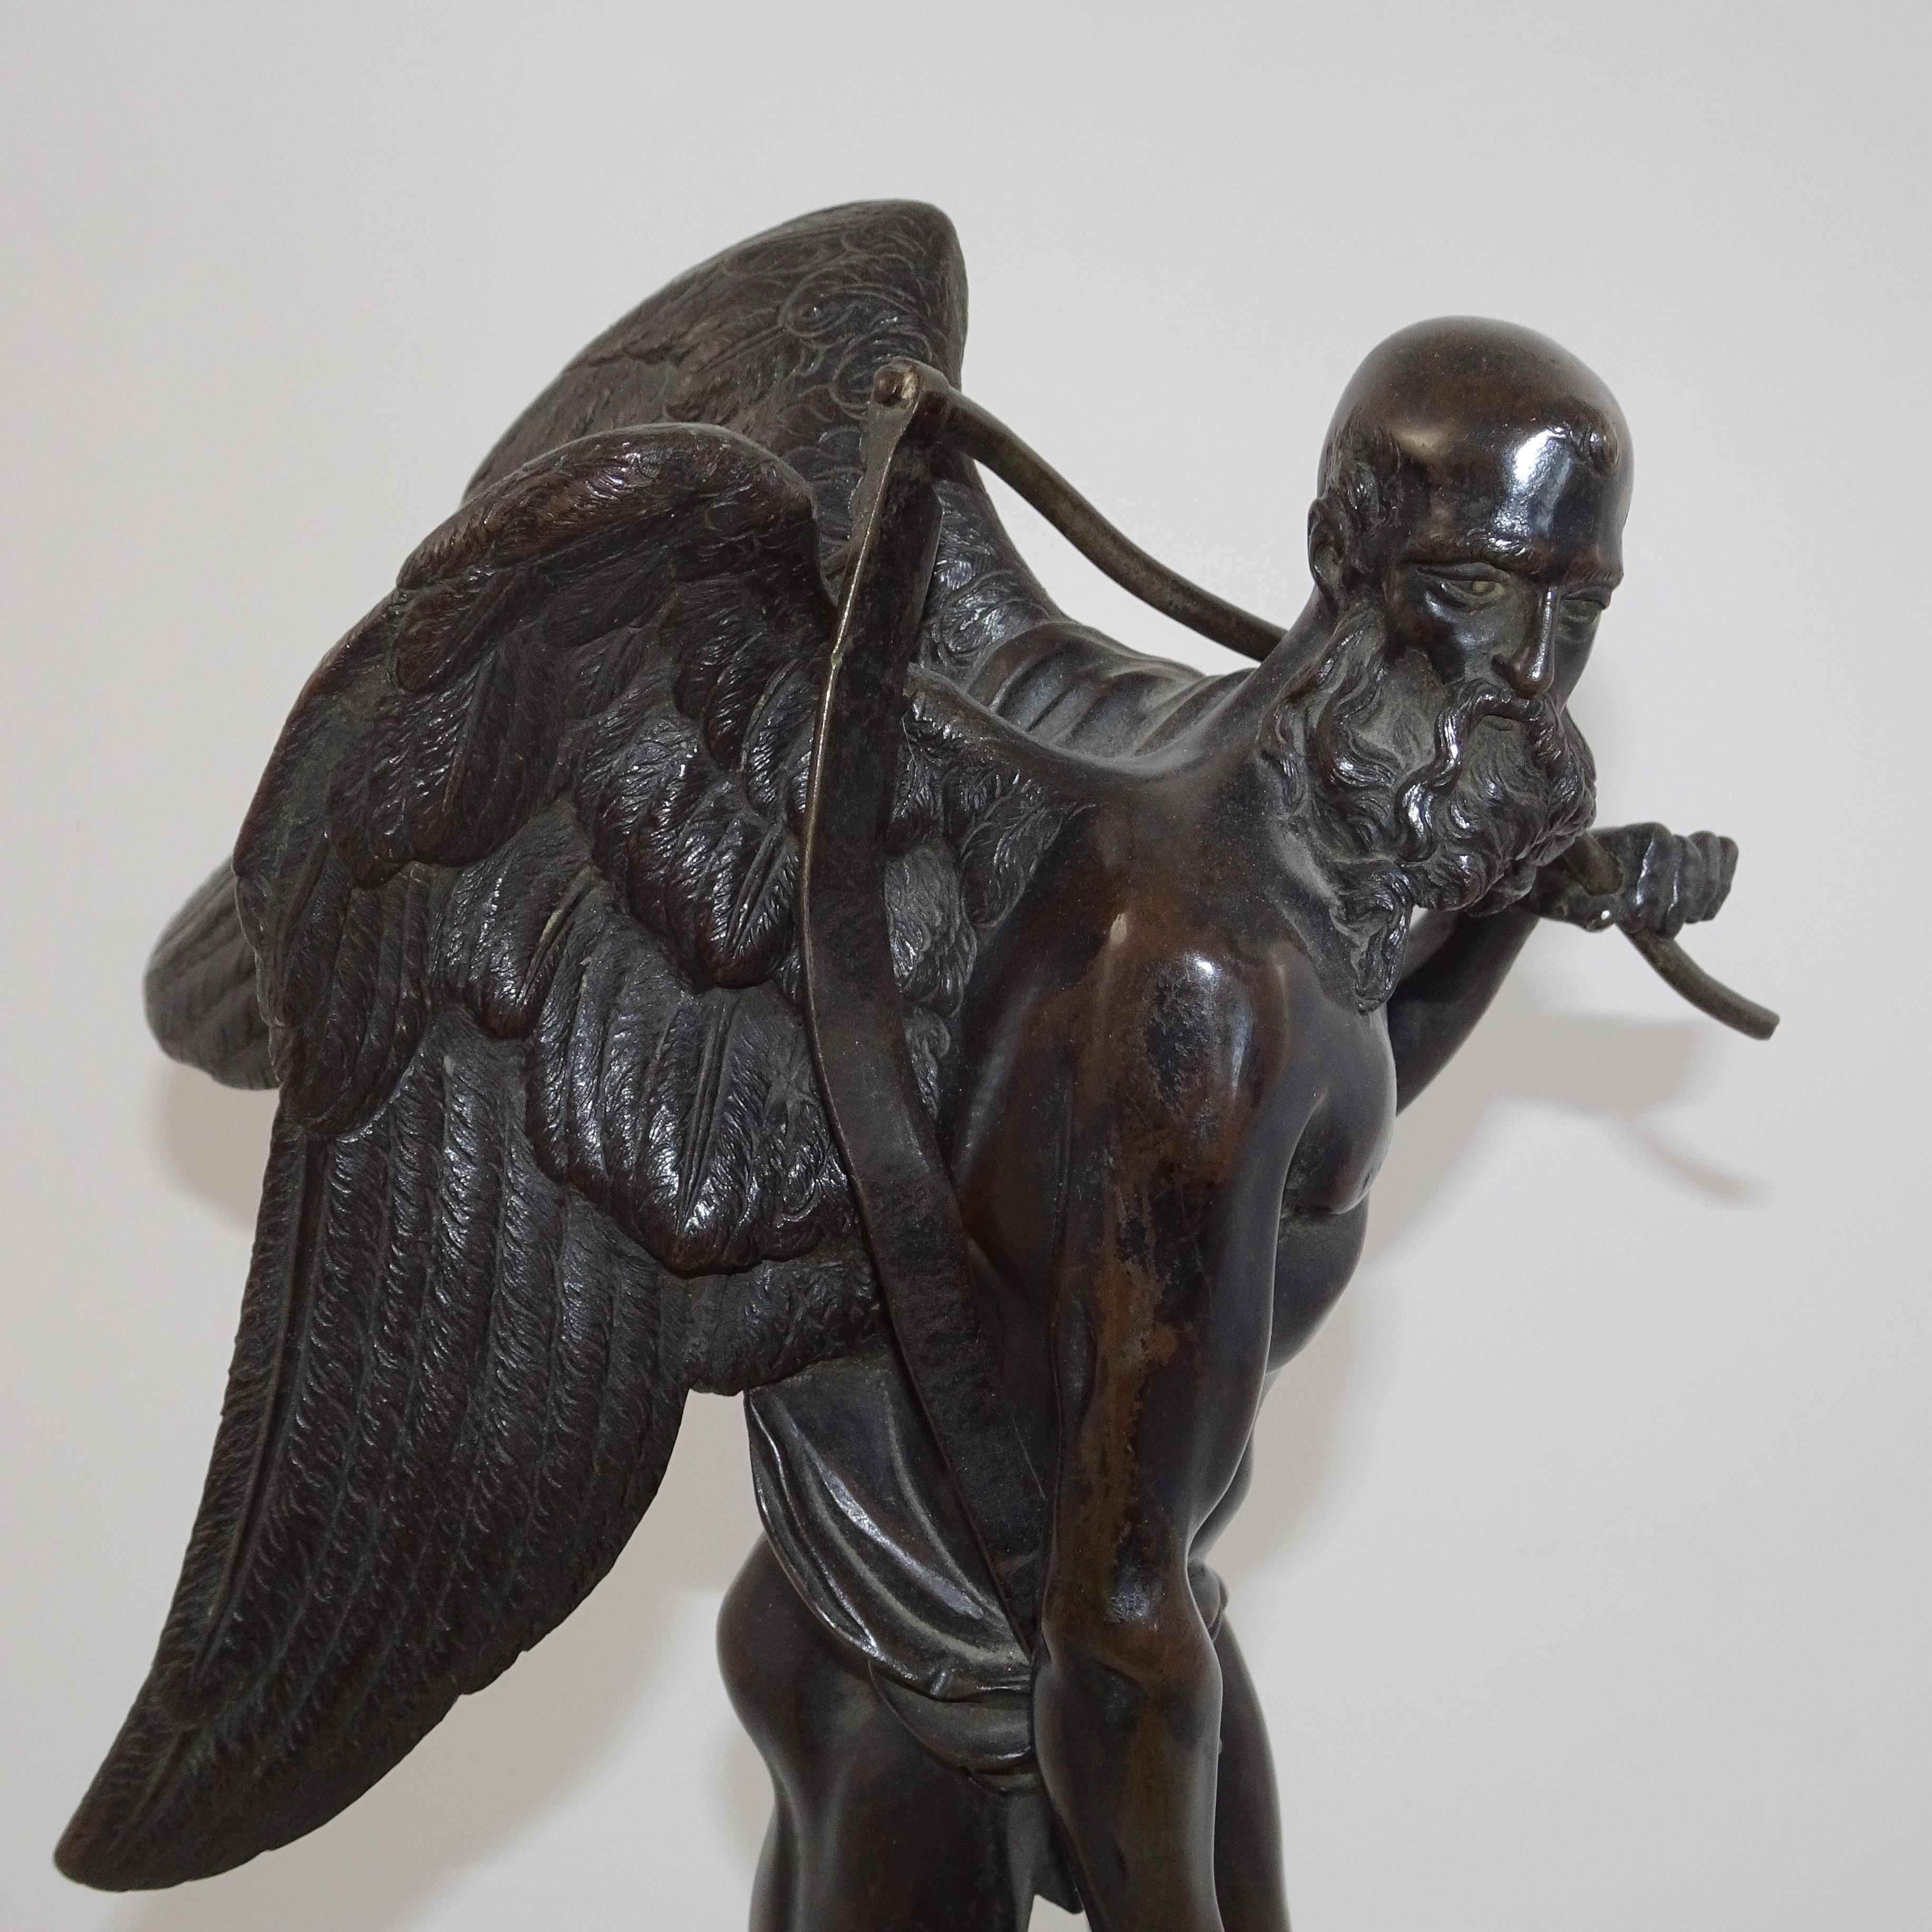 19th century black bronze statuette of winged old man on black base. This statuette depicts the biblical angel from Revelations 14 in which the Bible says 